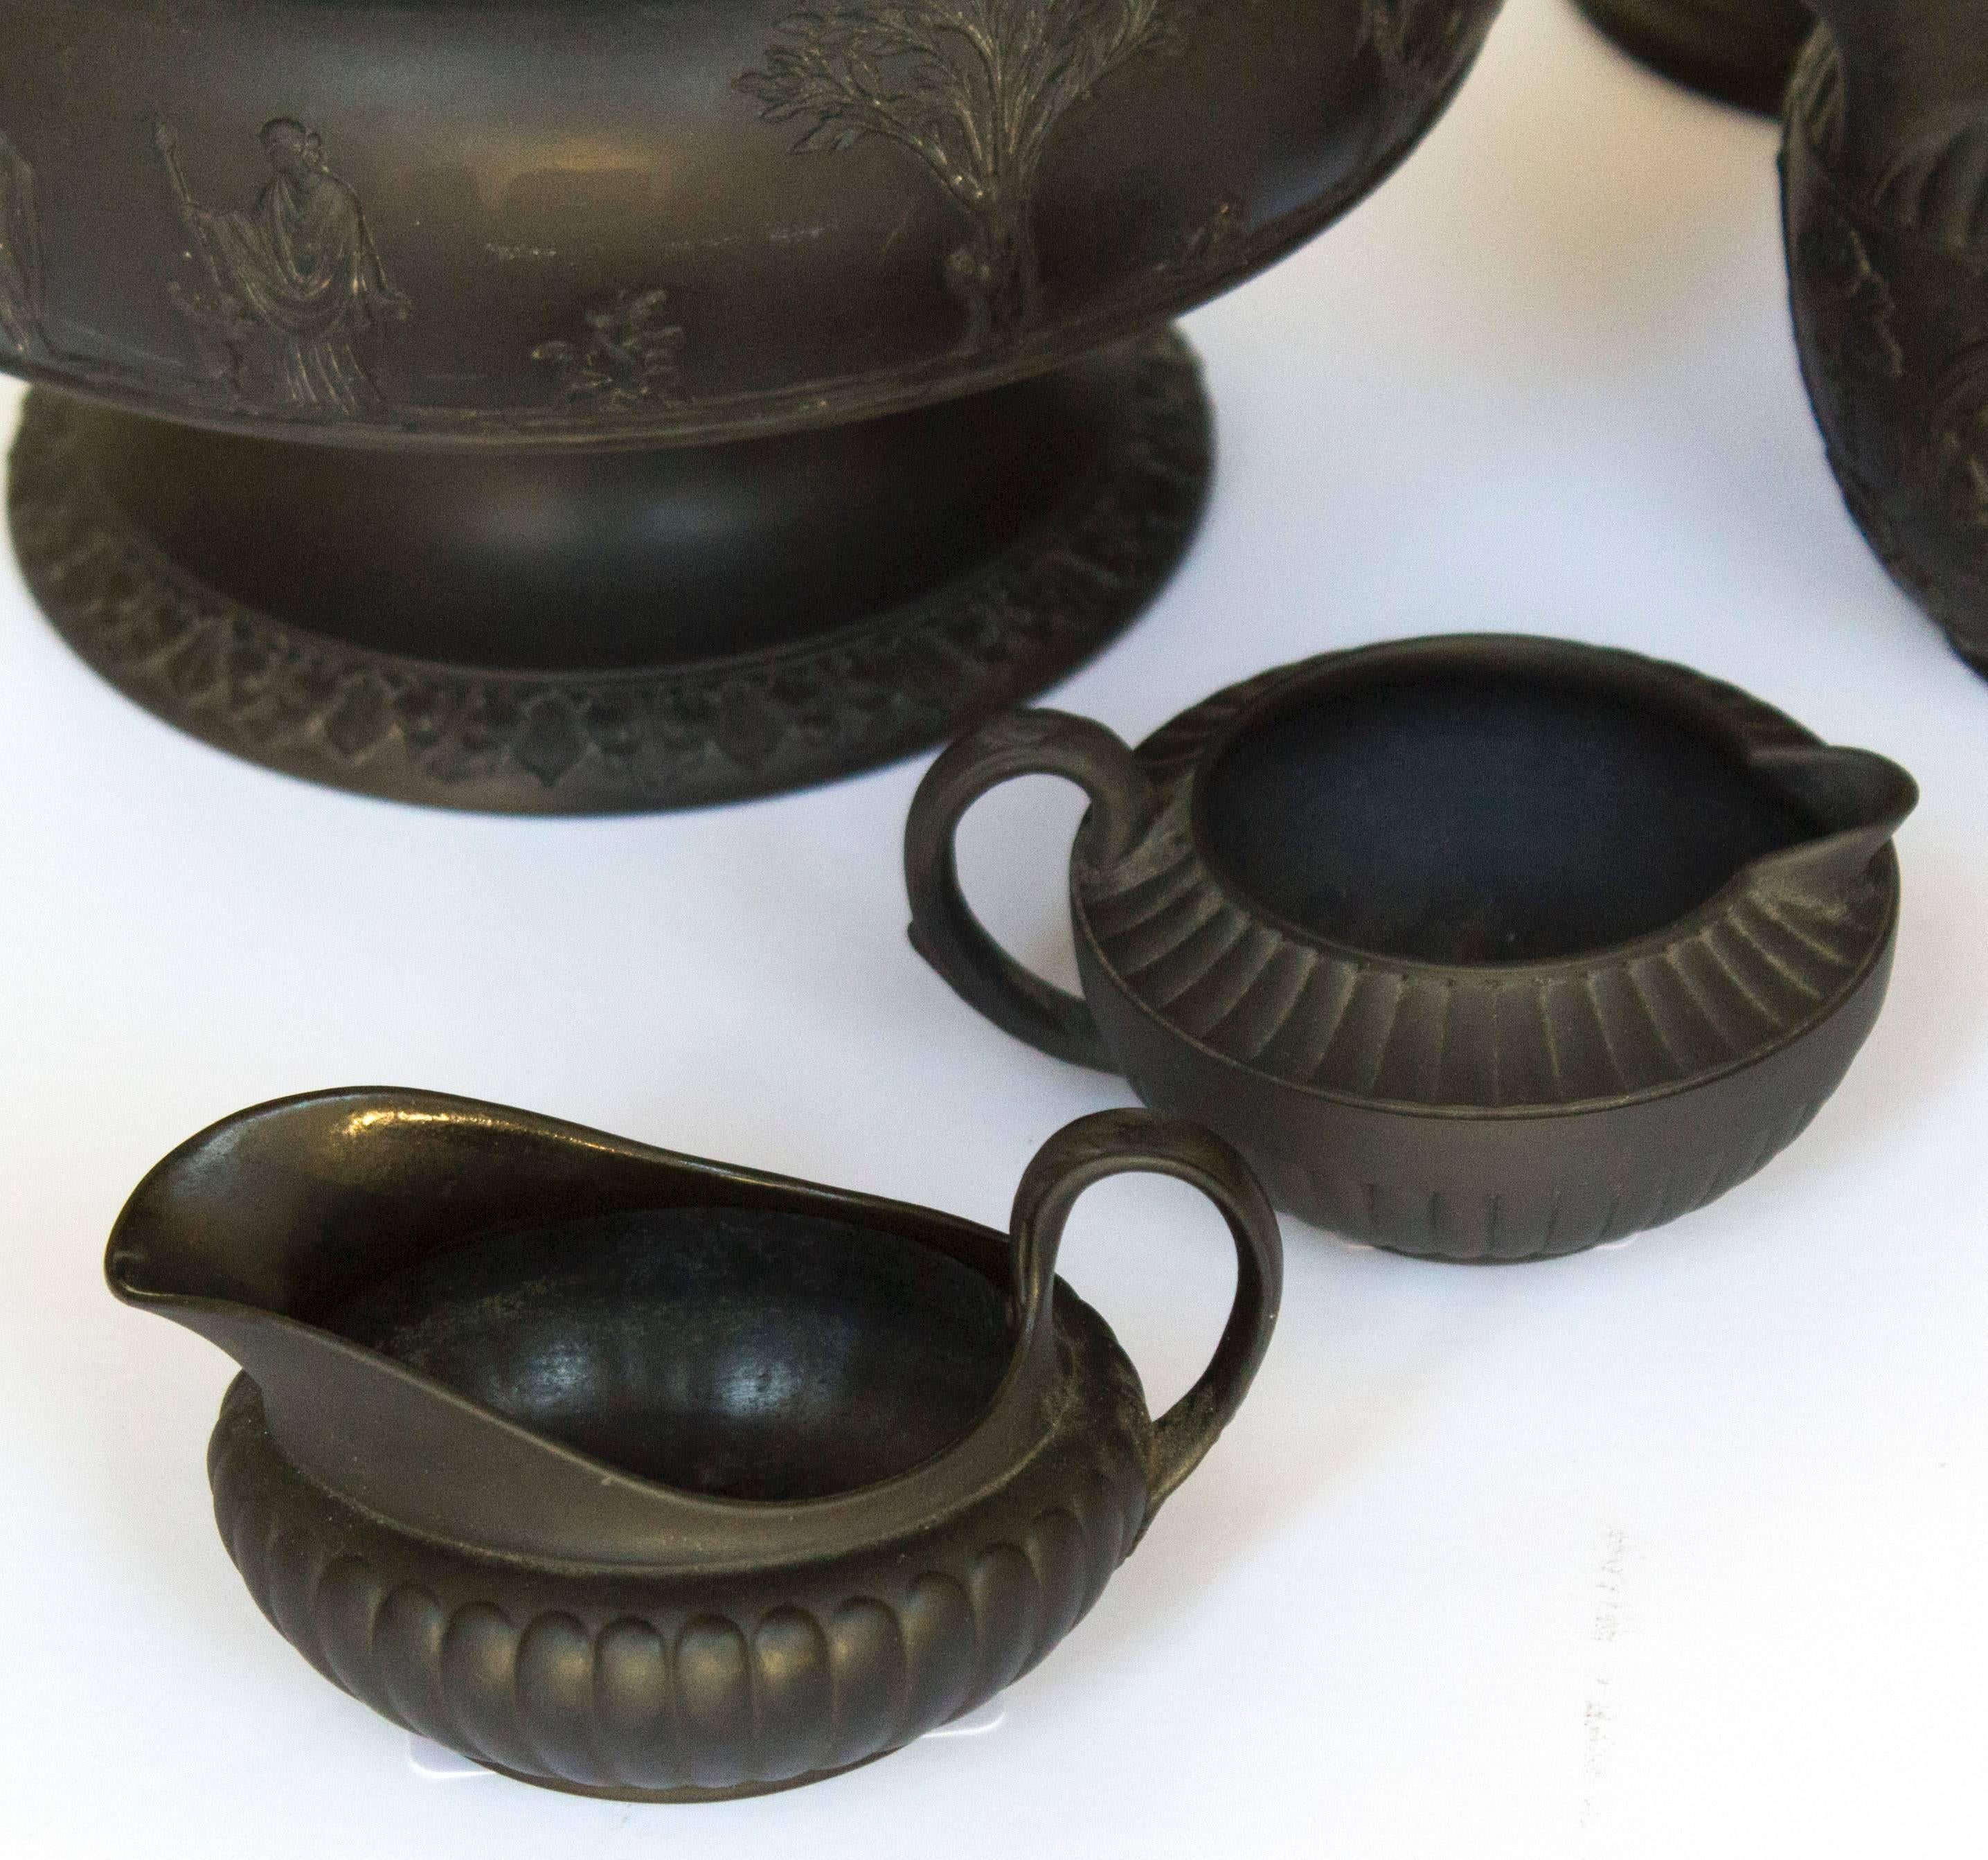 A five-piece set of Wedgwood Jasperware in black basalt. Tallest piece is approximately 12.5